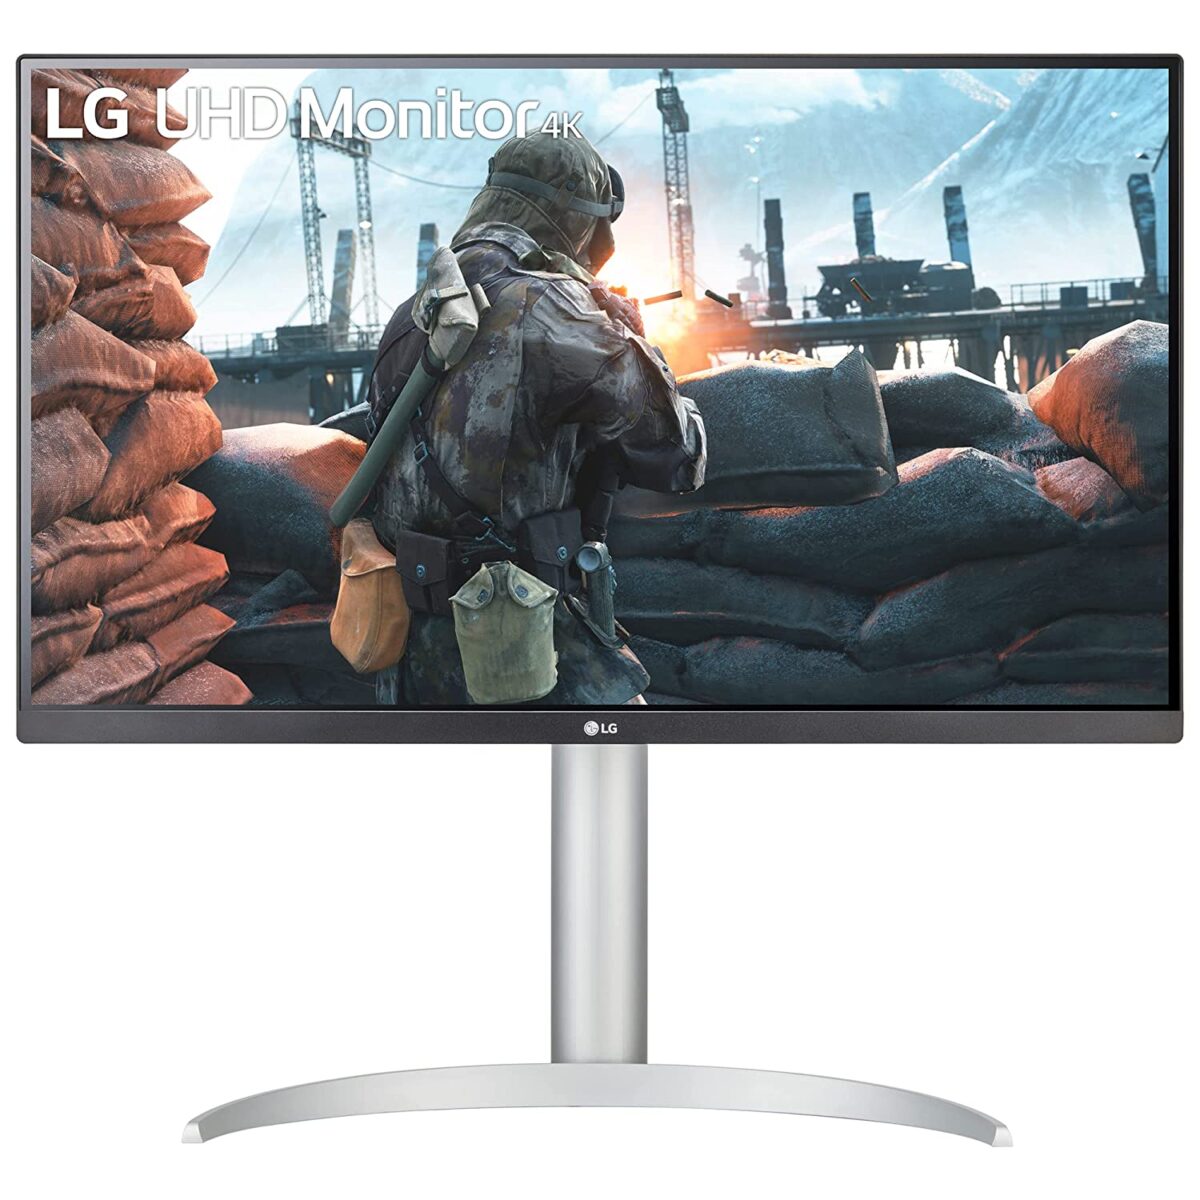 LG ‎27UP650-W.ATR 4K Monitor Launched in India ( VESA DisplayHDR 400 / AMD Freesync / DCI-P3 95% )